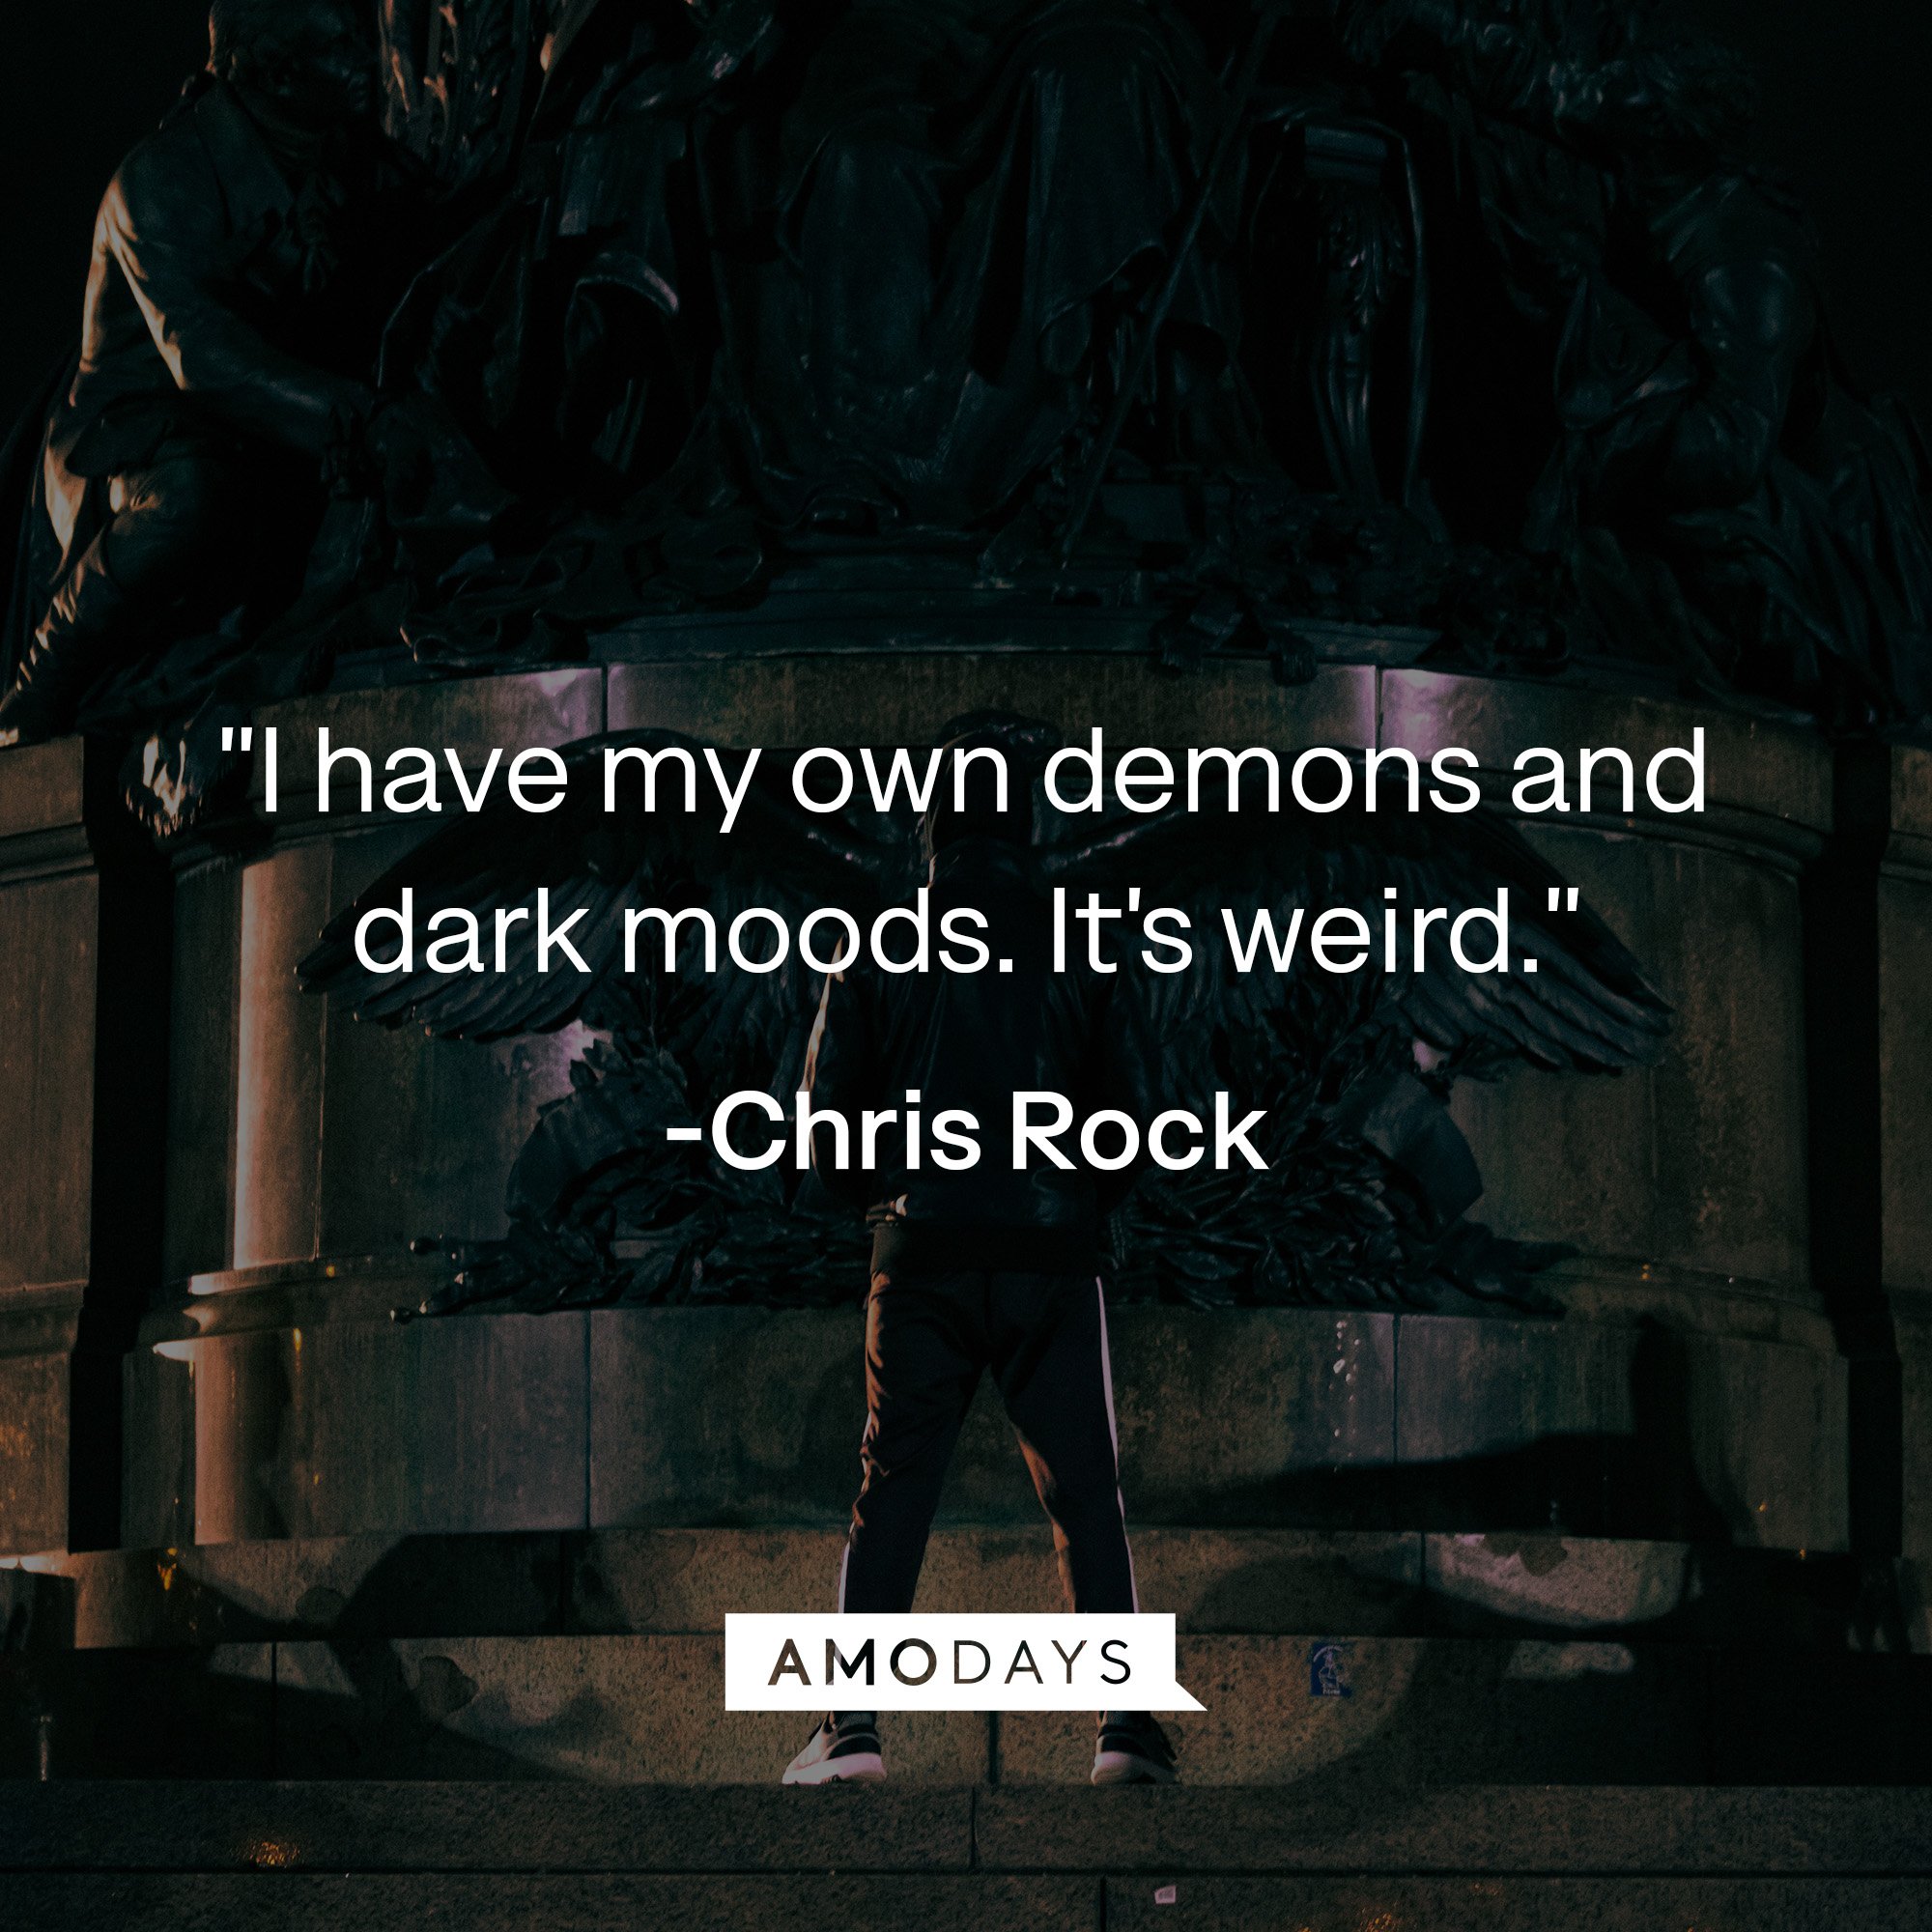   Chris Rock’s quote: "I have my own demons and dark moods. It's weird." | Image: AmoDays